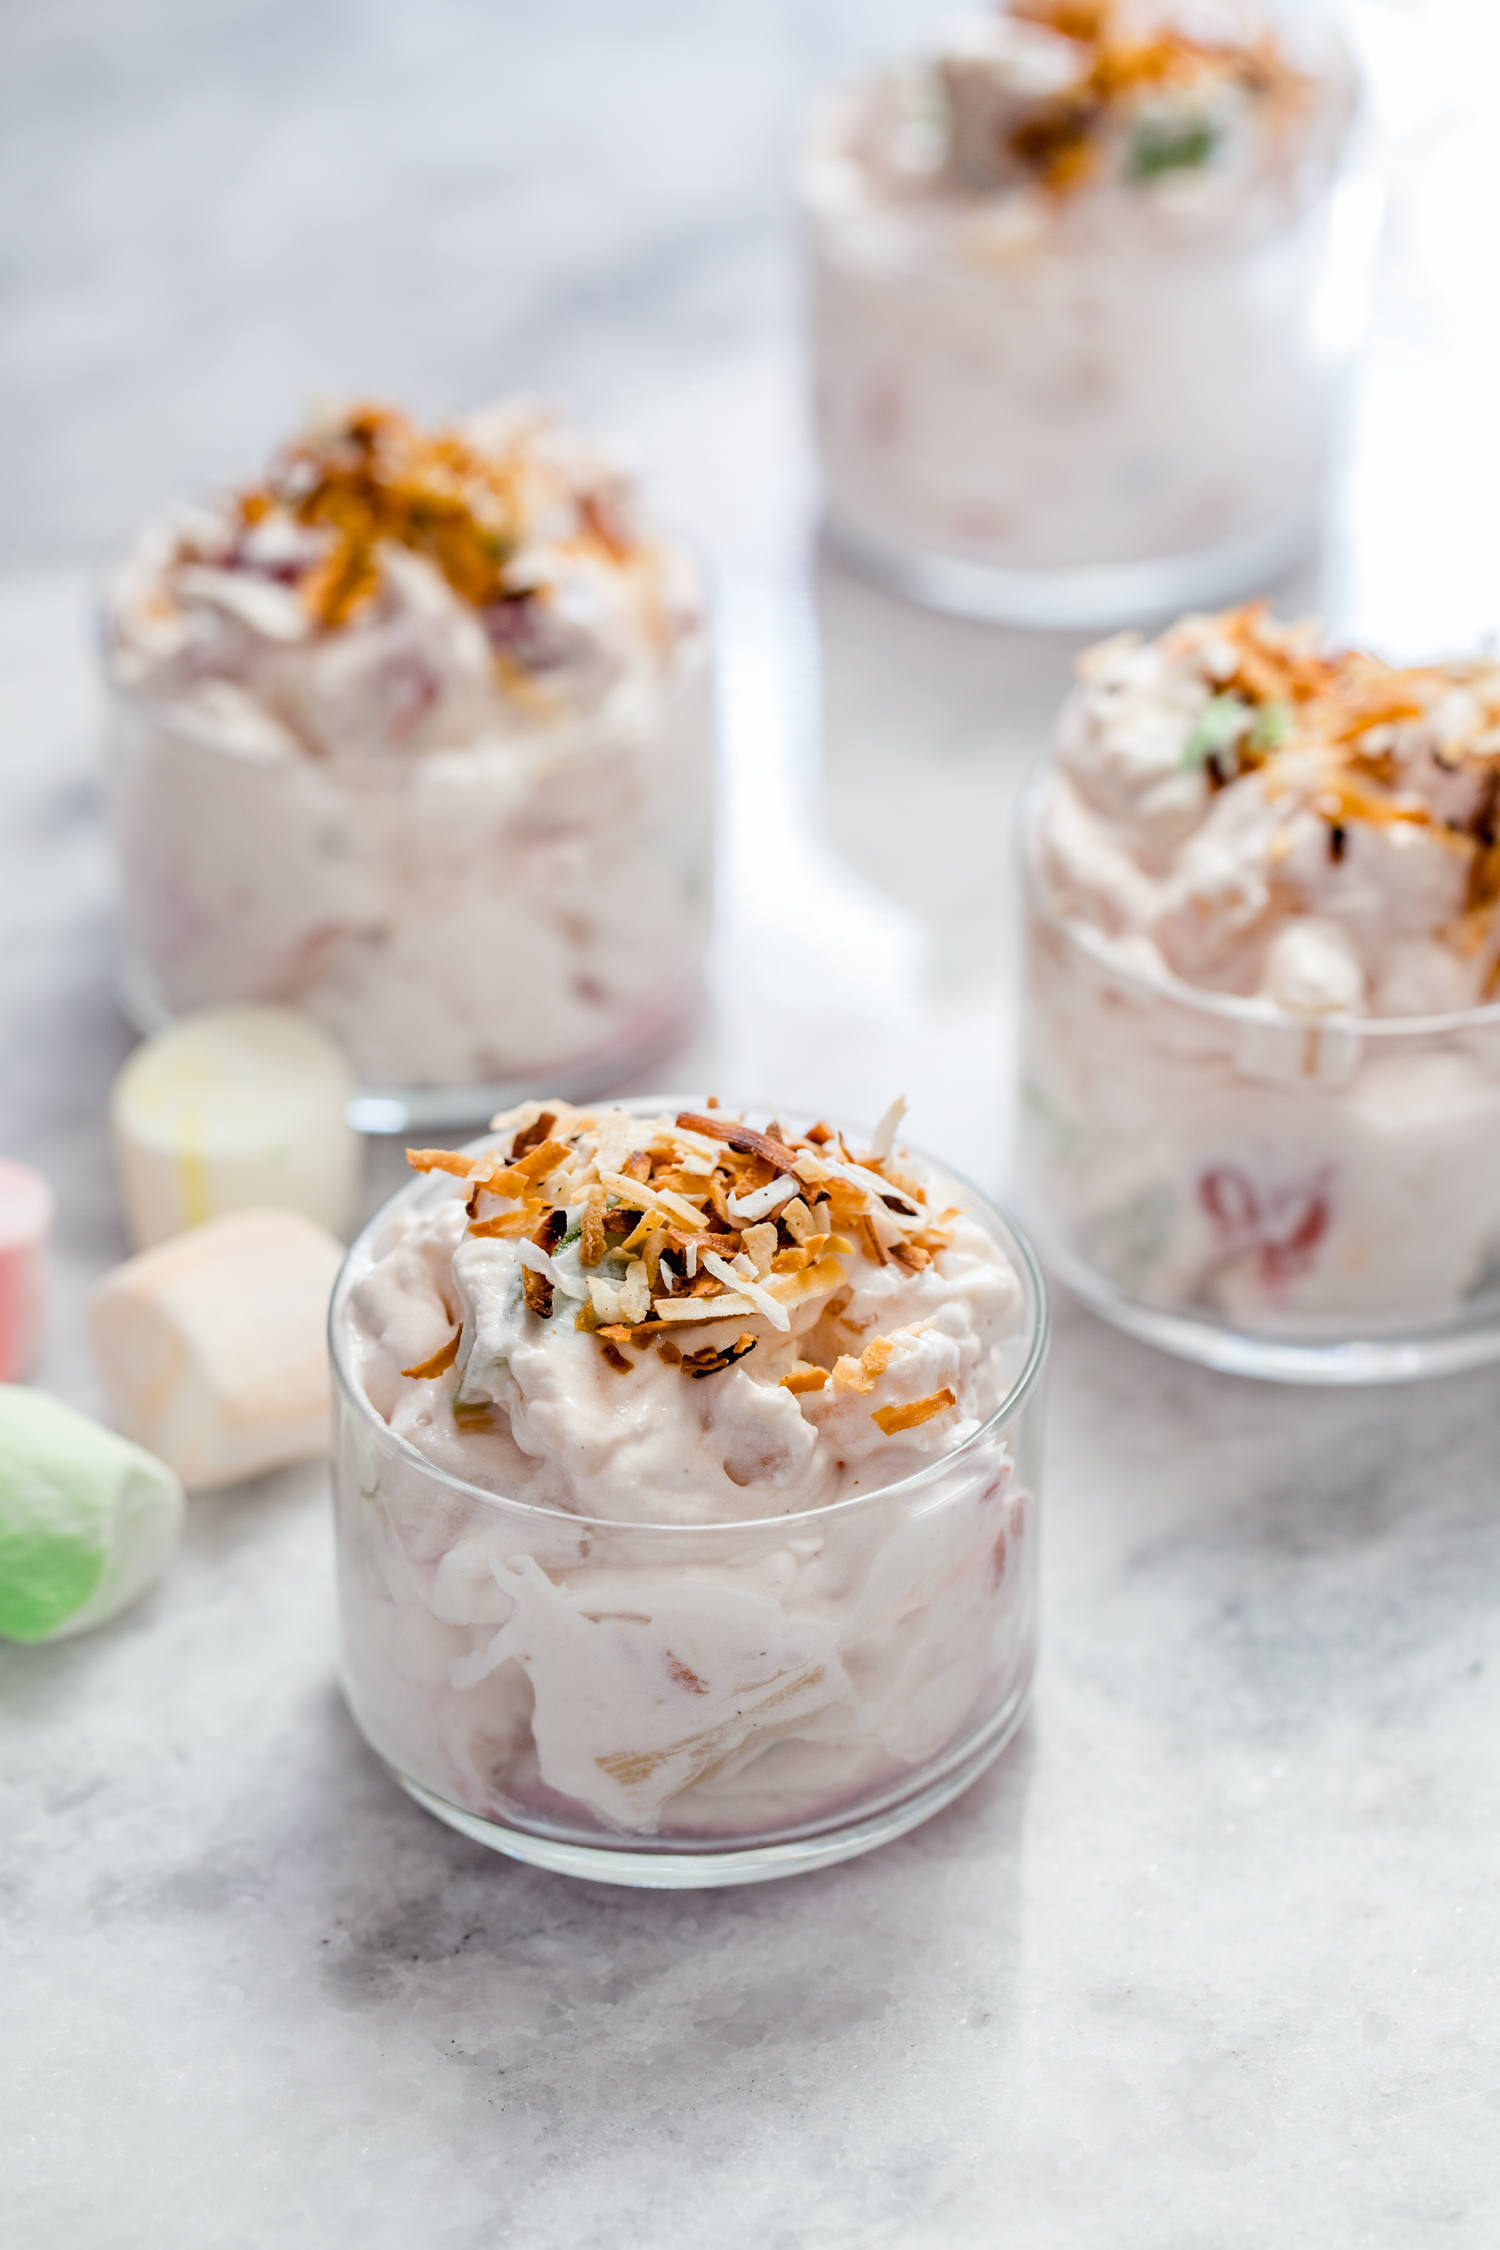 cups of ambrosia marshmallow salad